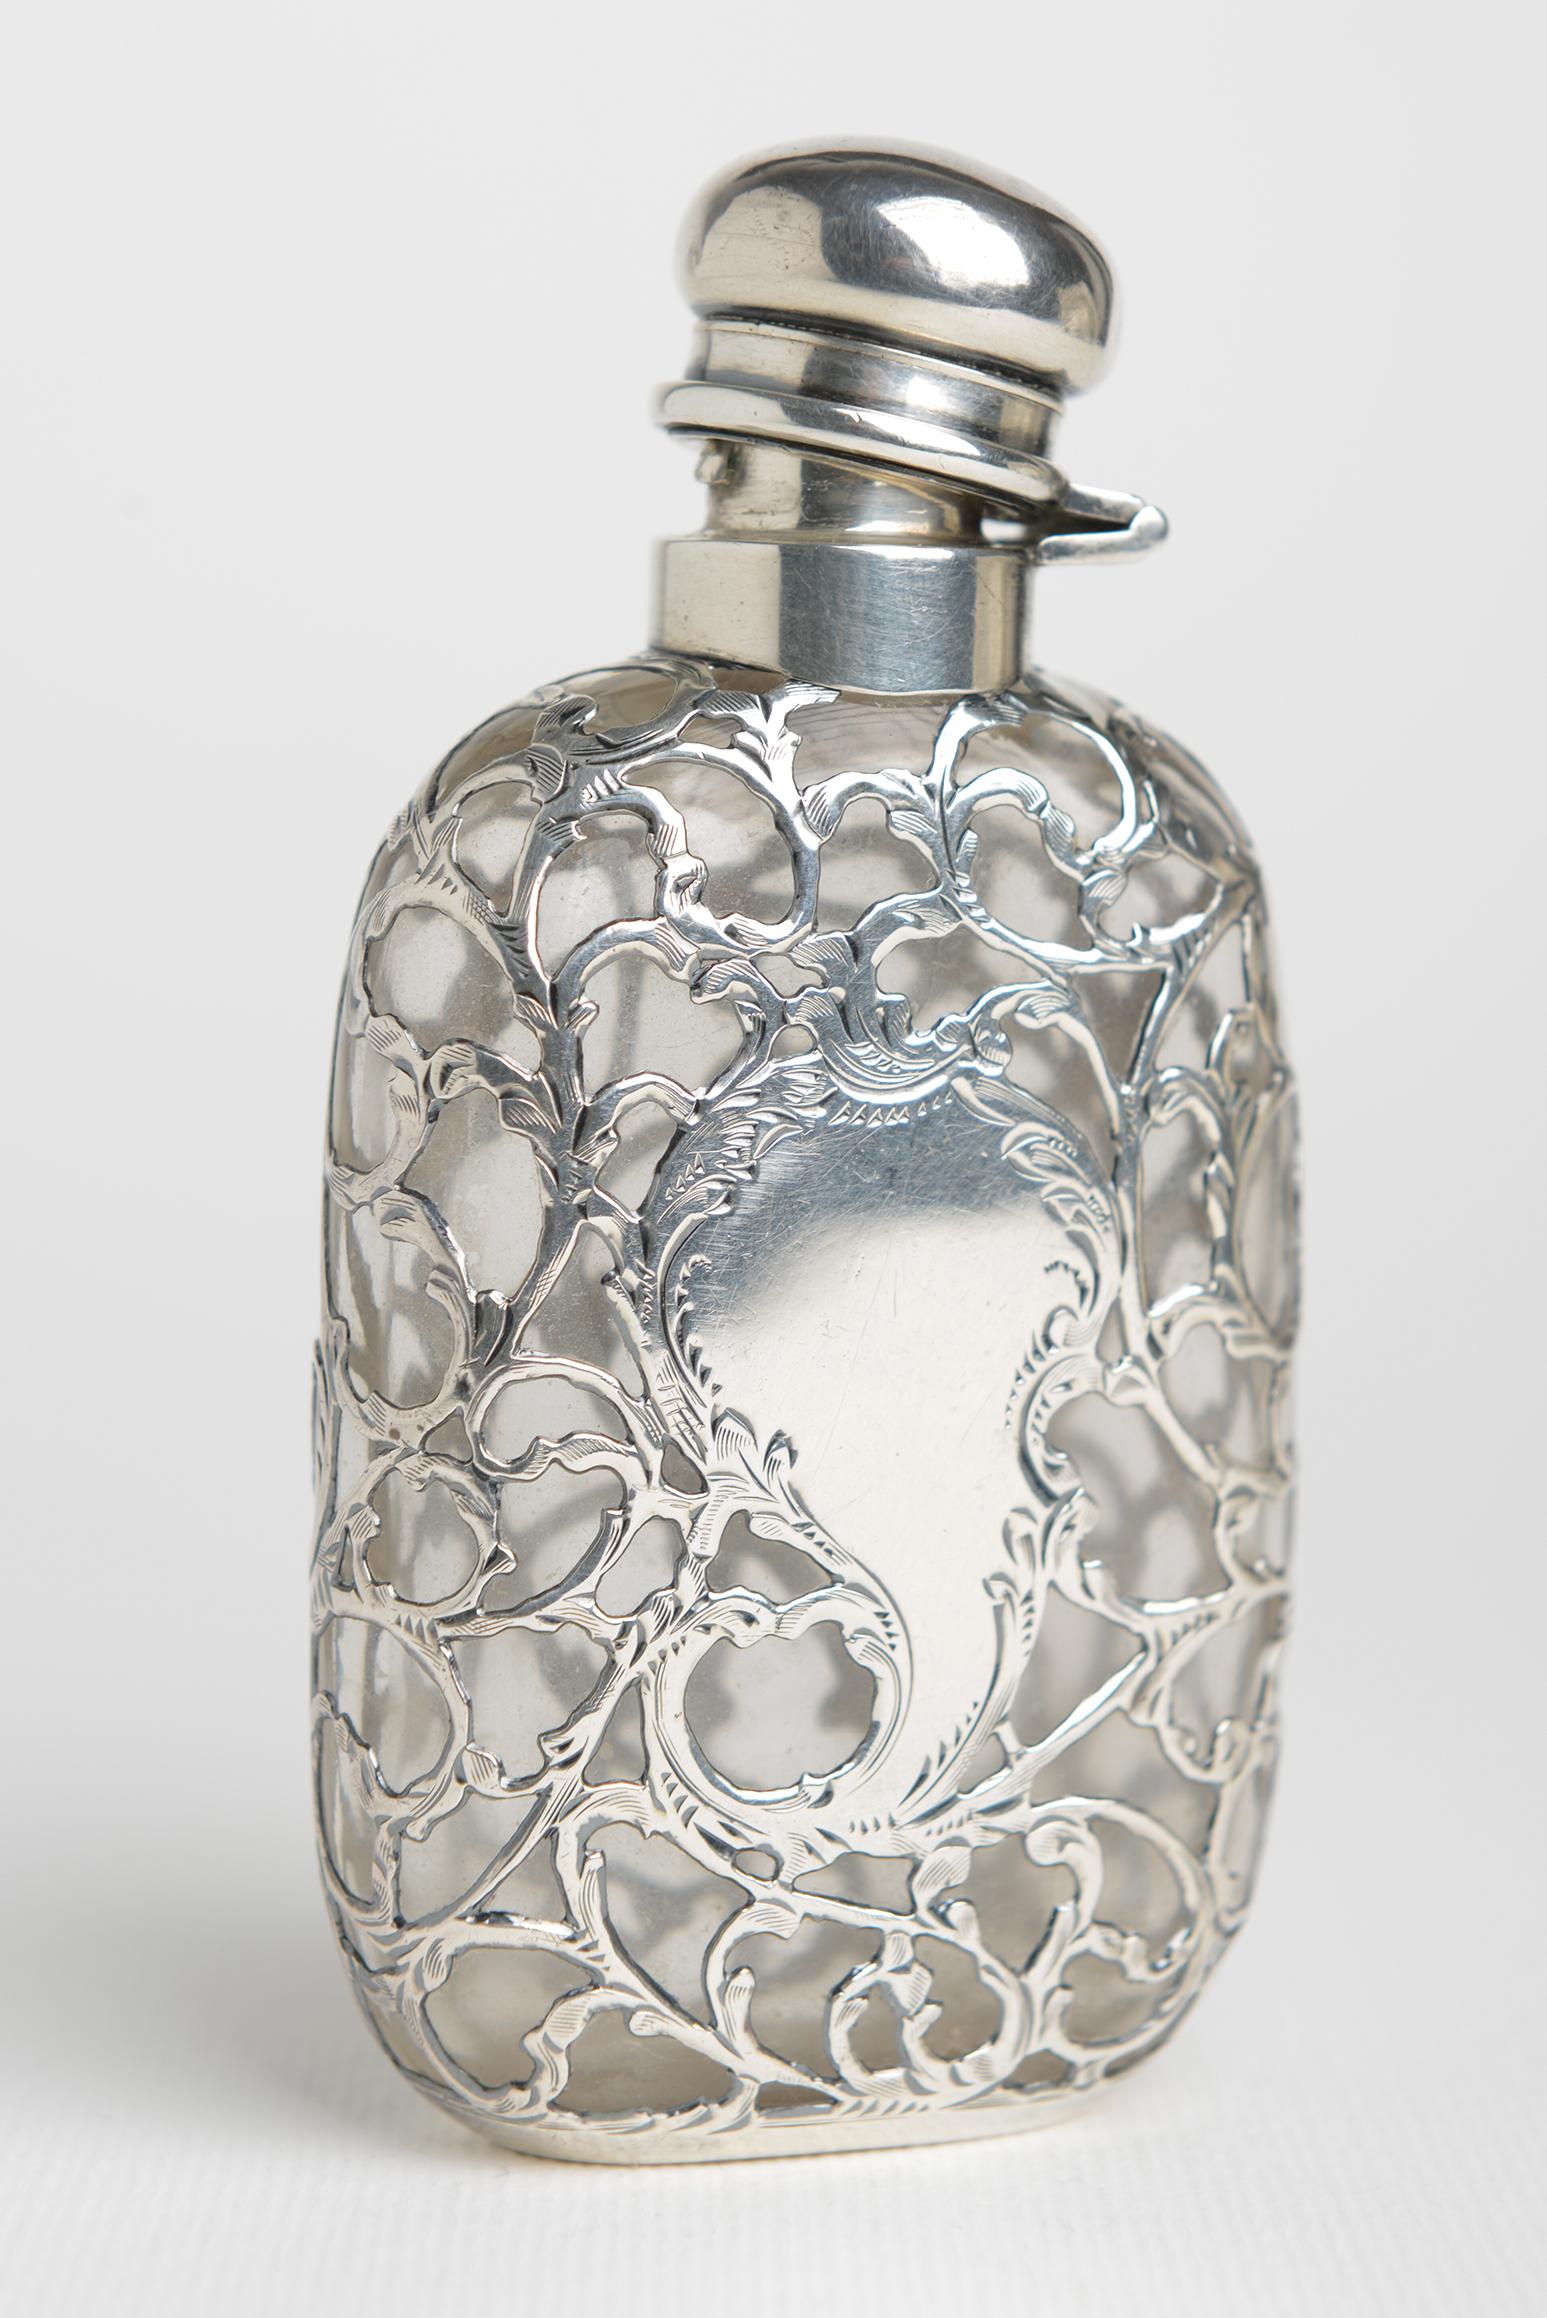 Other English Silver Pocket Wiskey Flask